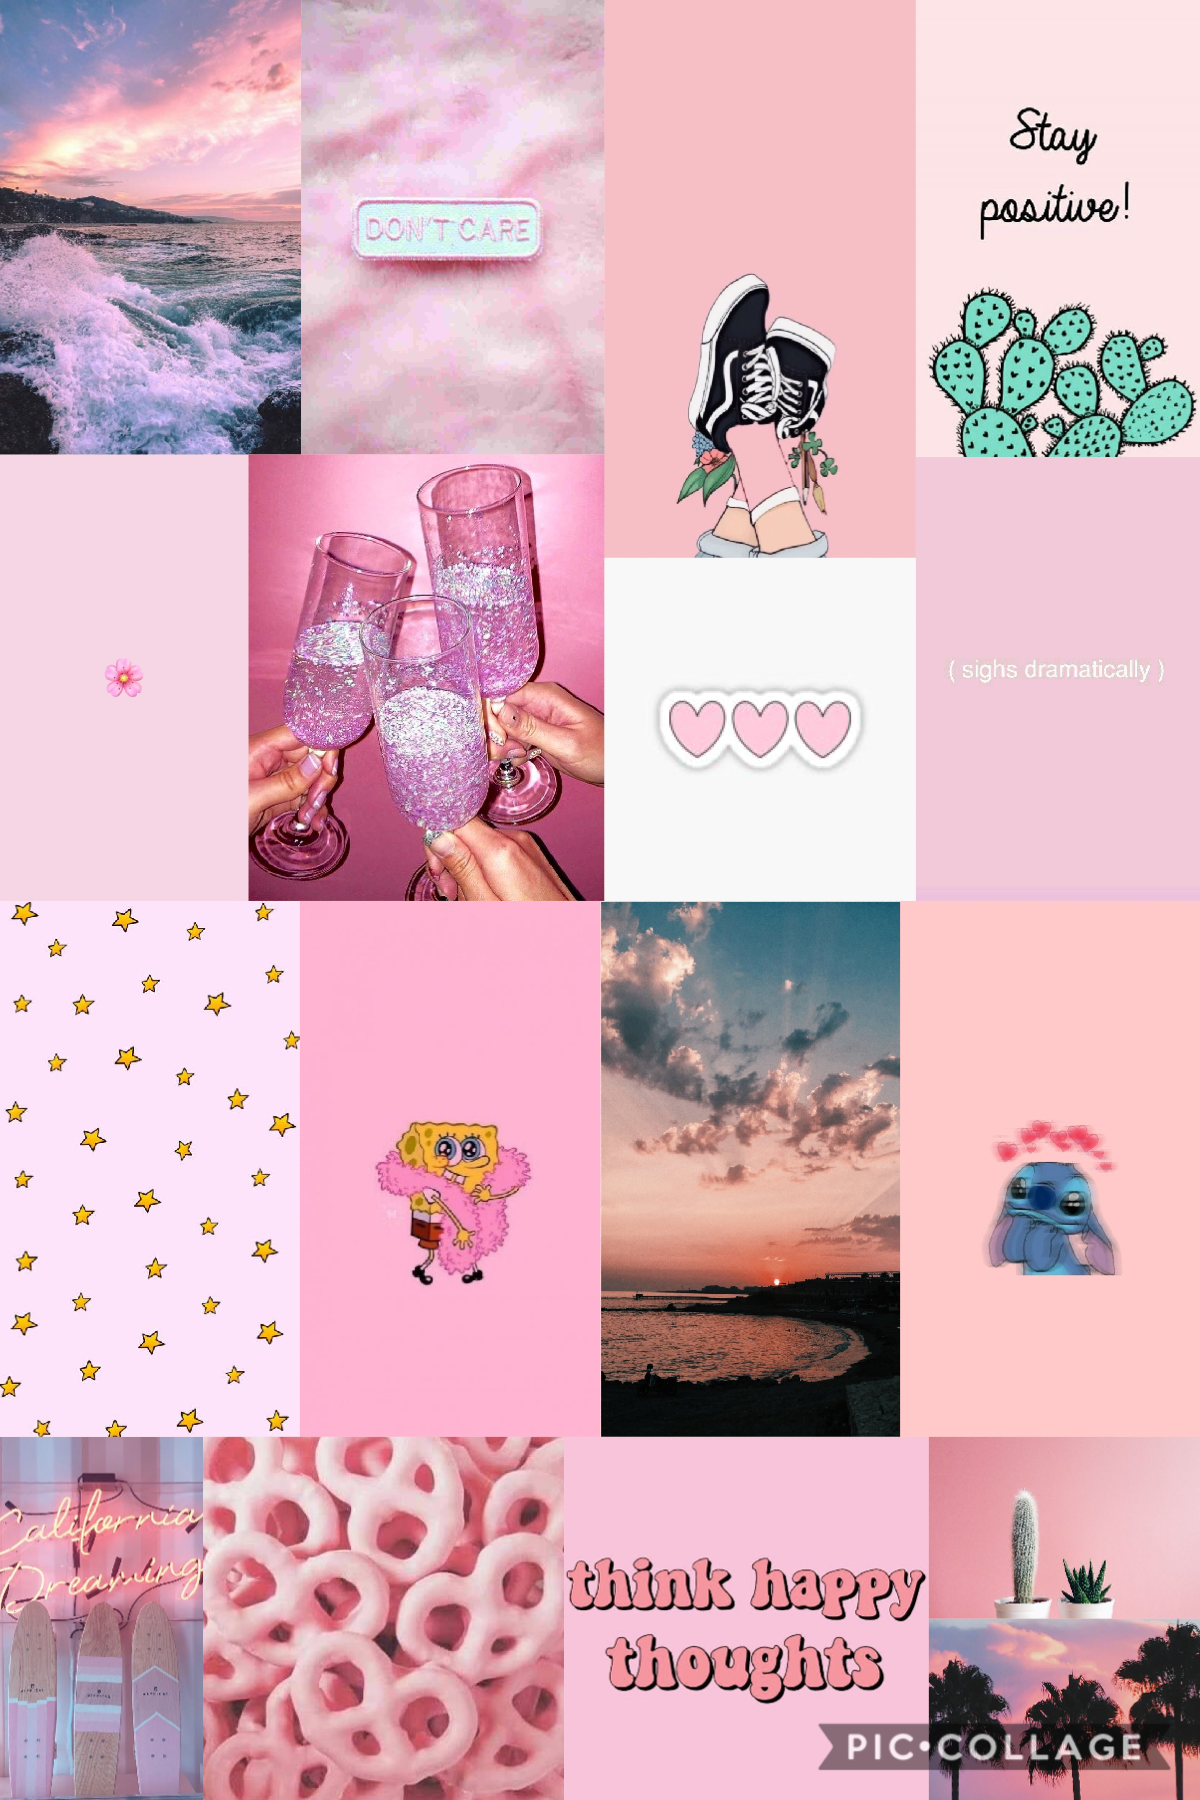 aesthetic😍
please like and share and if u use it then PLEASE give credit!!! 